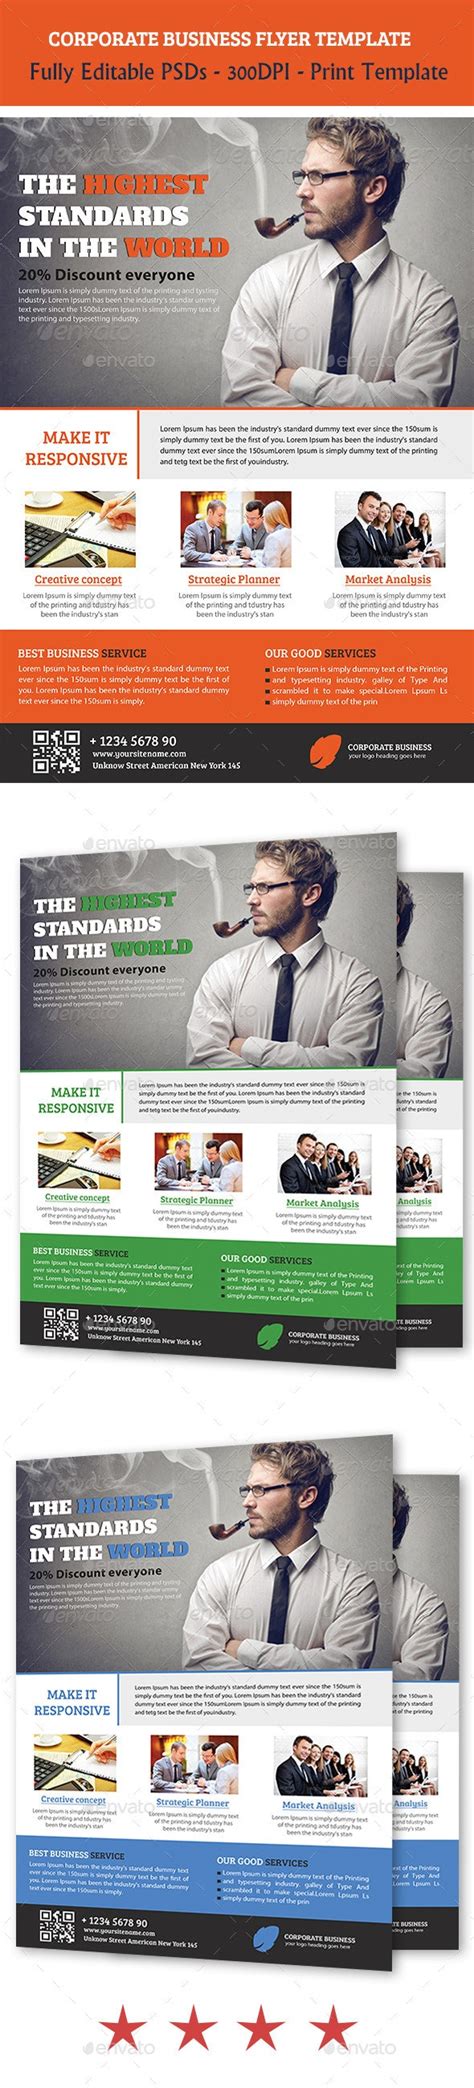 Corporate Business Flyer Temp By Theweb Designs Graphicriver